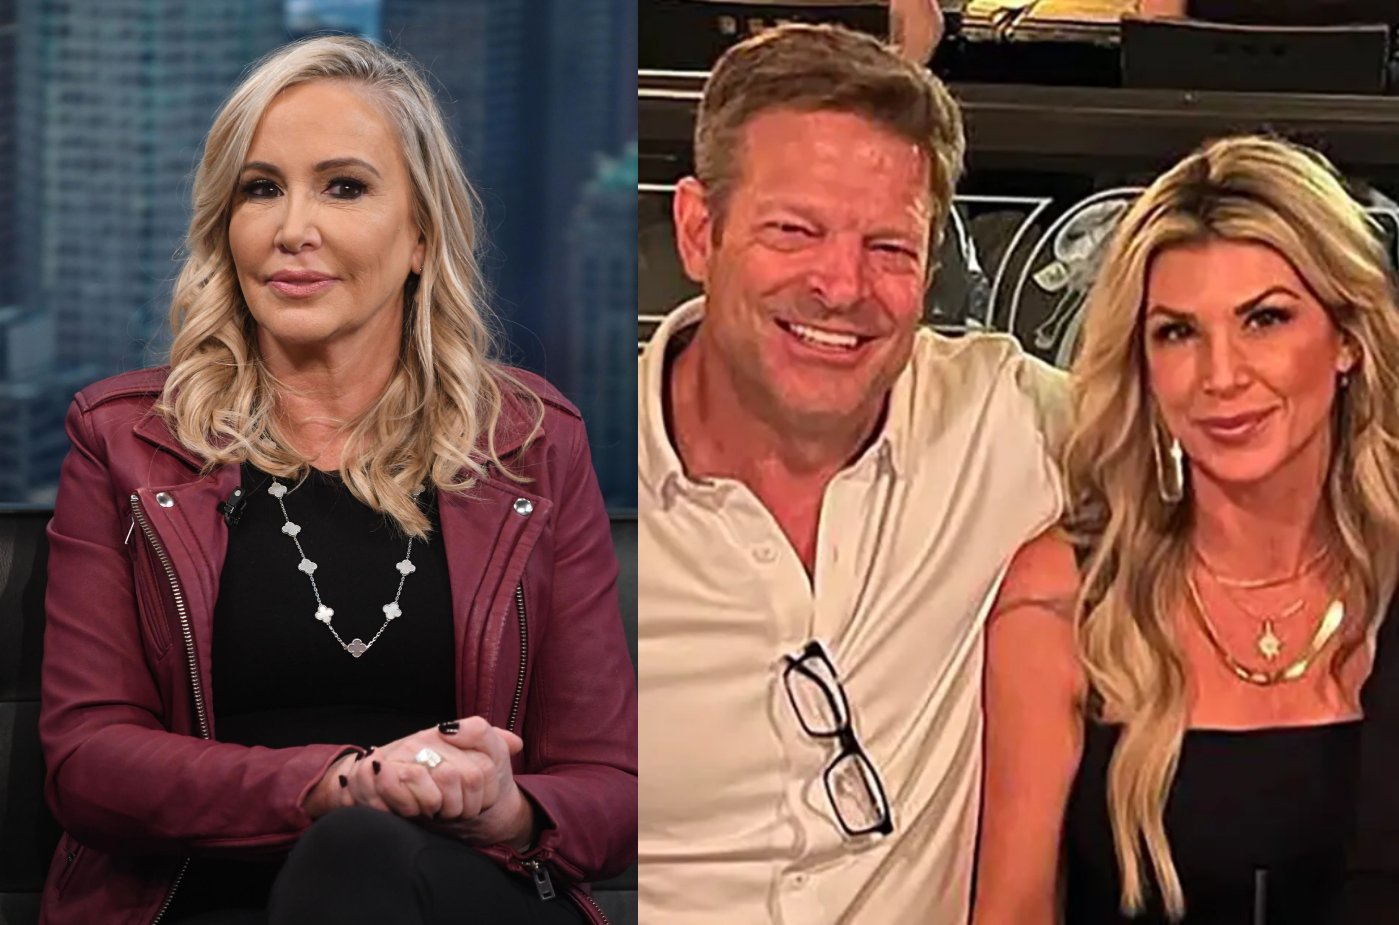 REPORT: RHOC's Shannon Beador "Will Be Furious" if John Janssen Dates Alexis Bellino as Insider Claims He's "Calling and Texting" Her